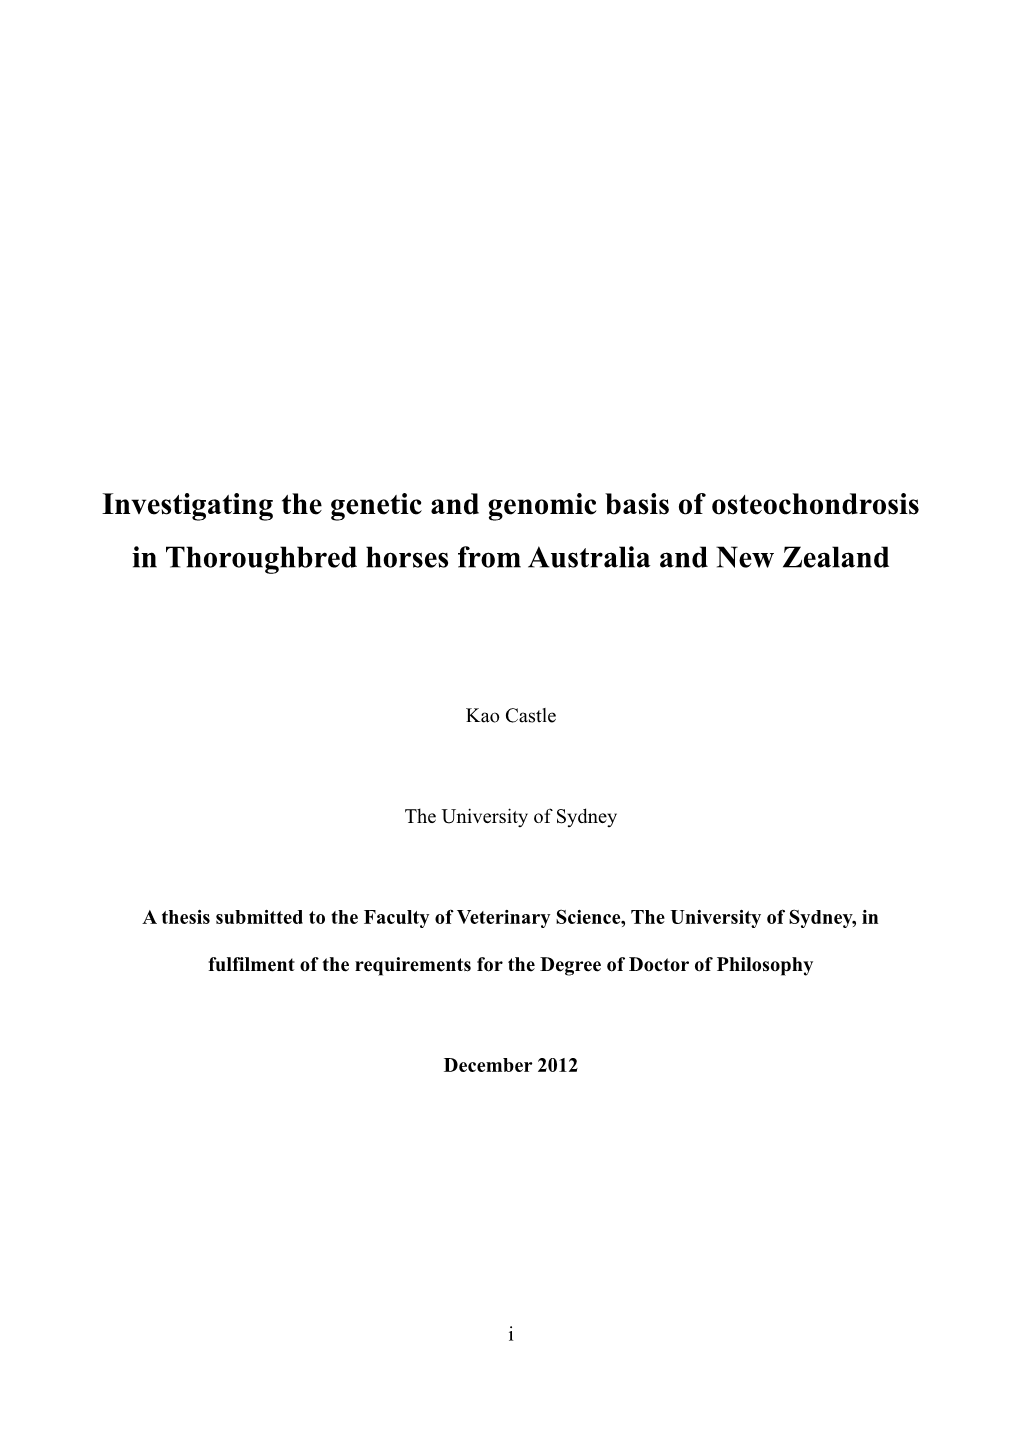 Investigating the Genetic and Genomic Basis of Osteochondrosis in Thoroughbred Horses from Australia and New Zealand